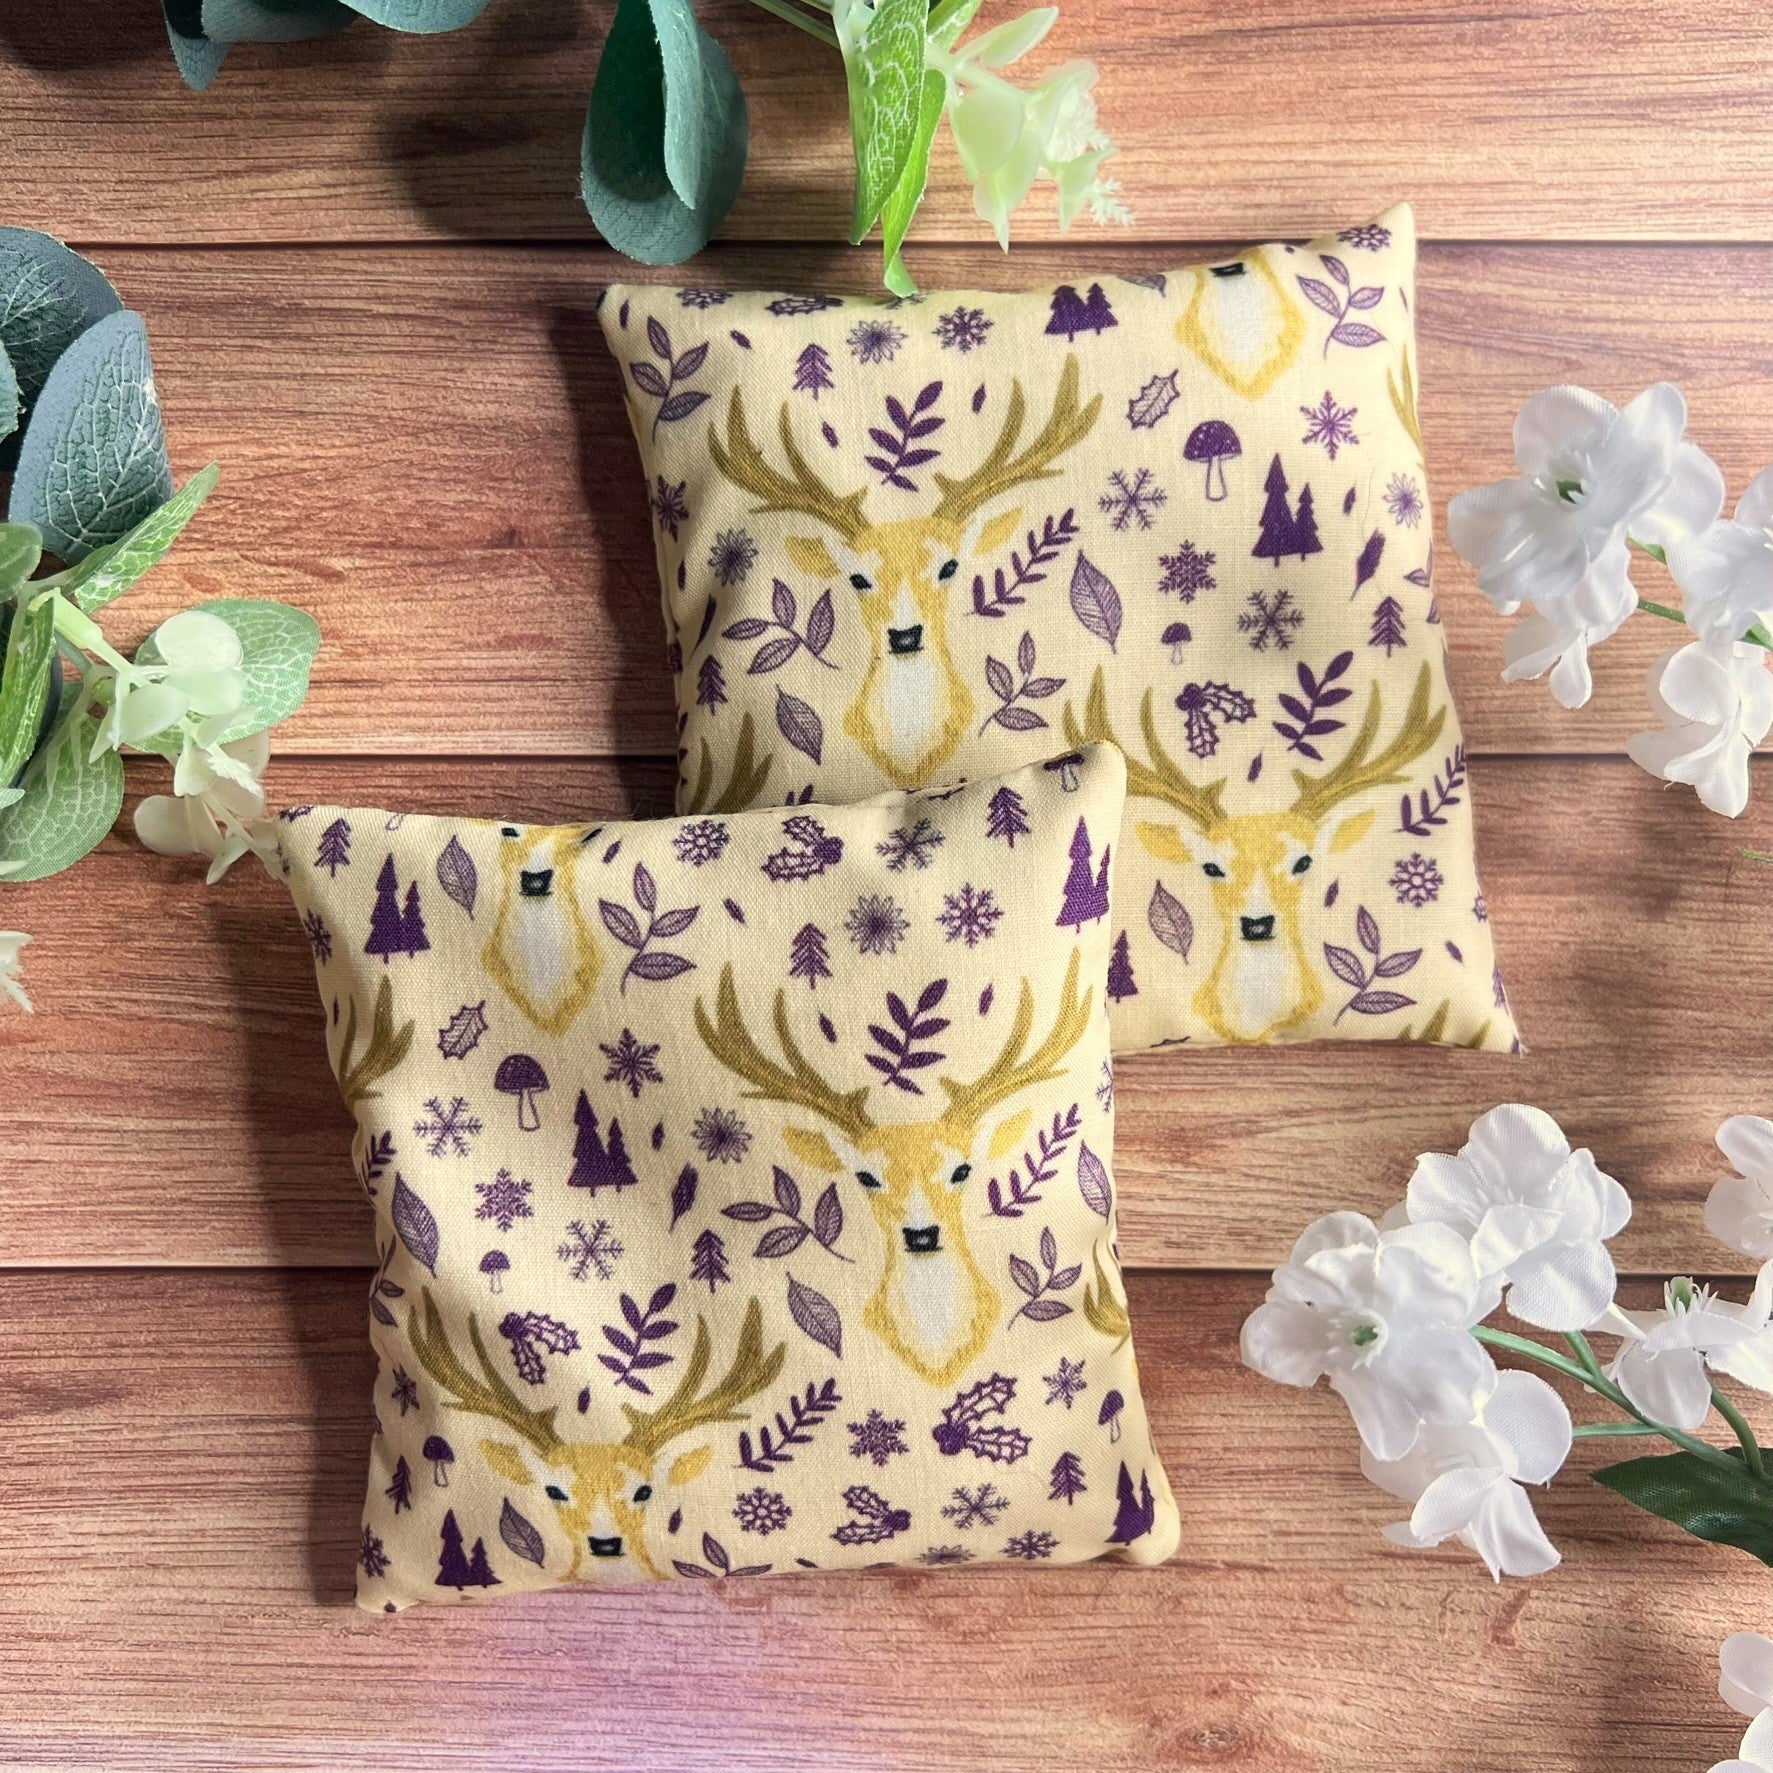 Enjoy warm hands this winter with our winter hand warmers with a lovely deer pattern for those who love deer.